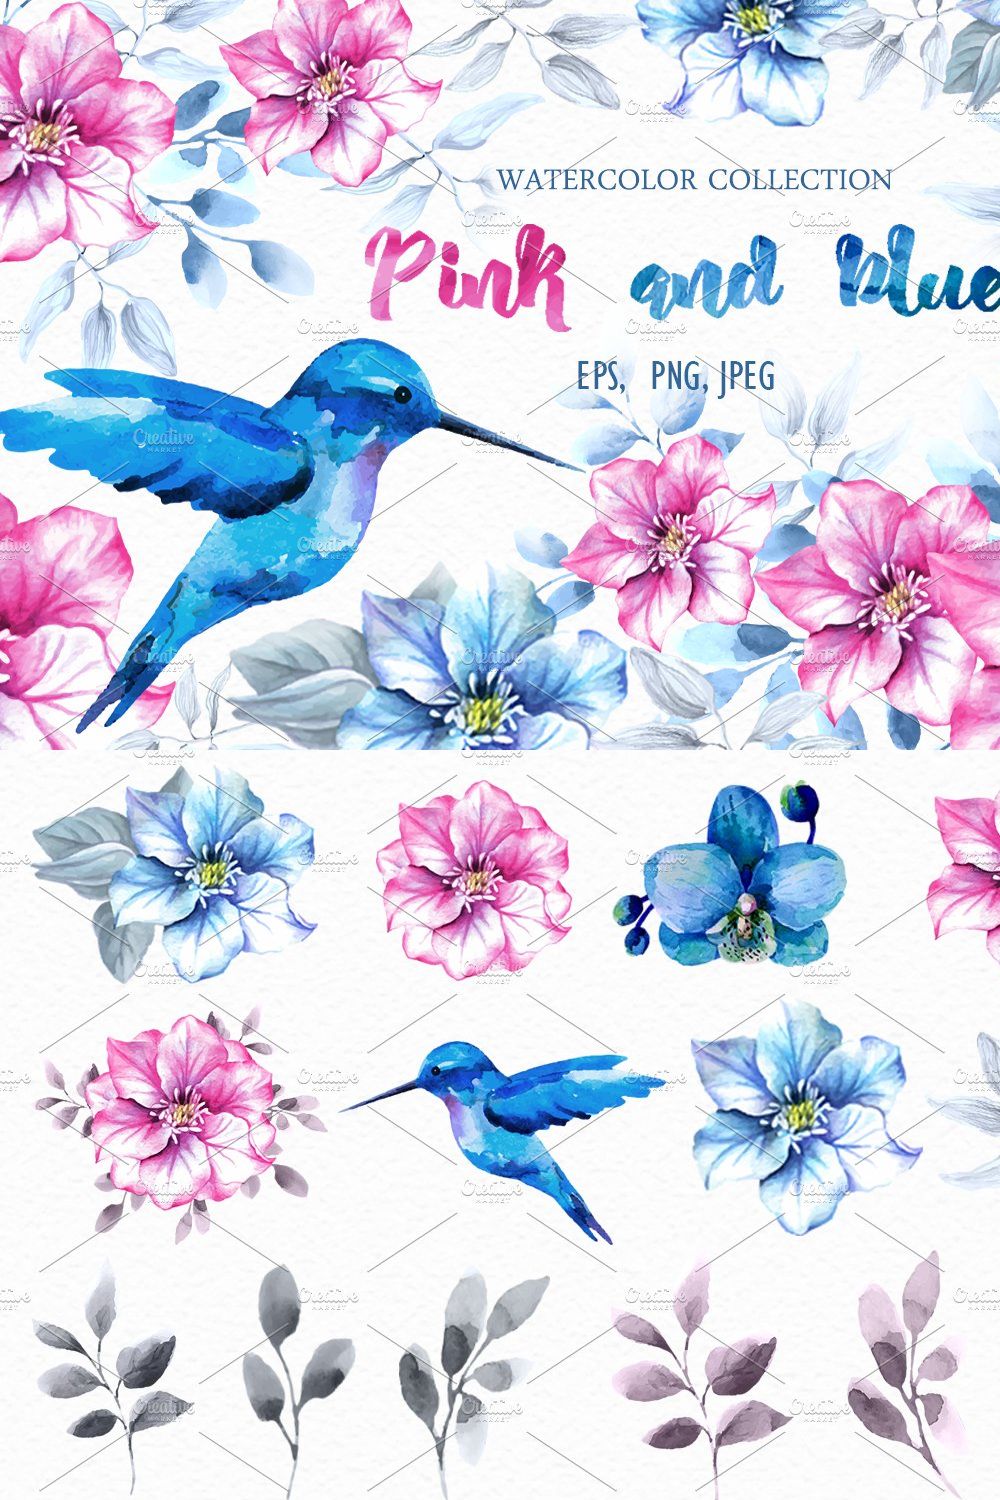 Pink and blue. Watercolor collection pinterest preview image.